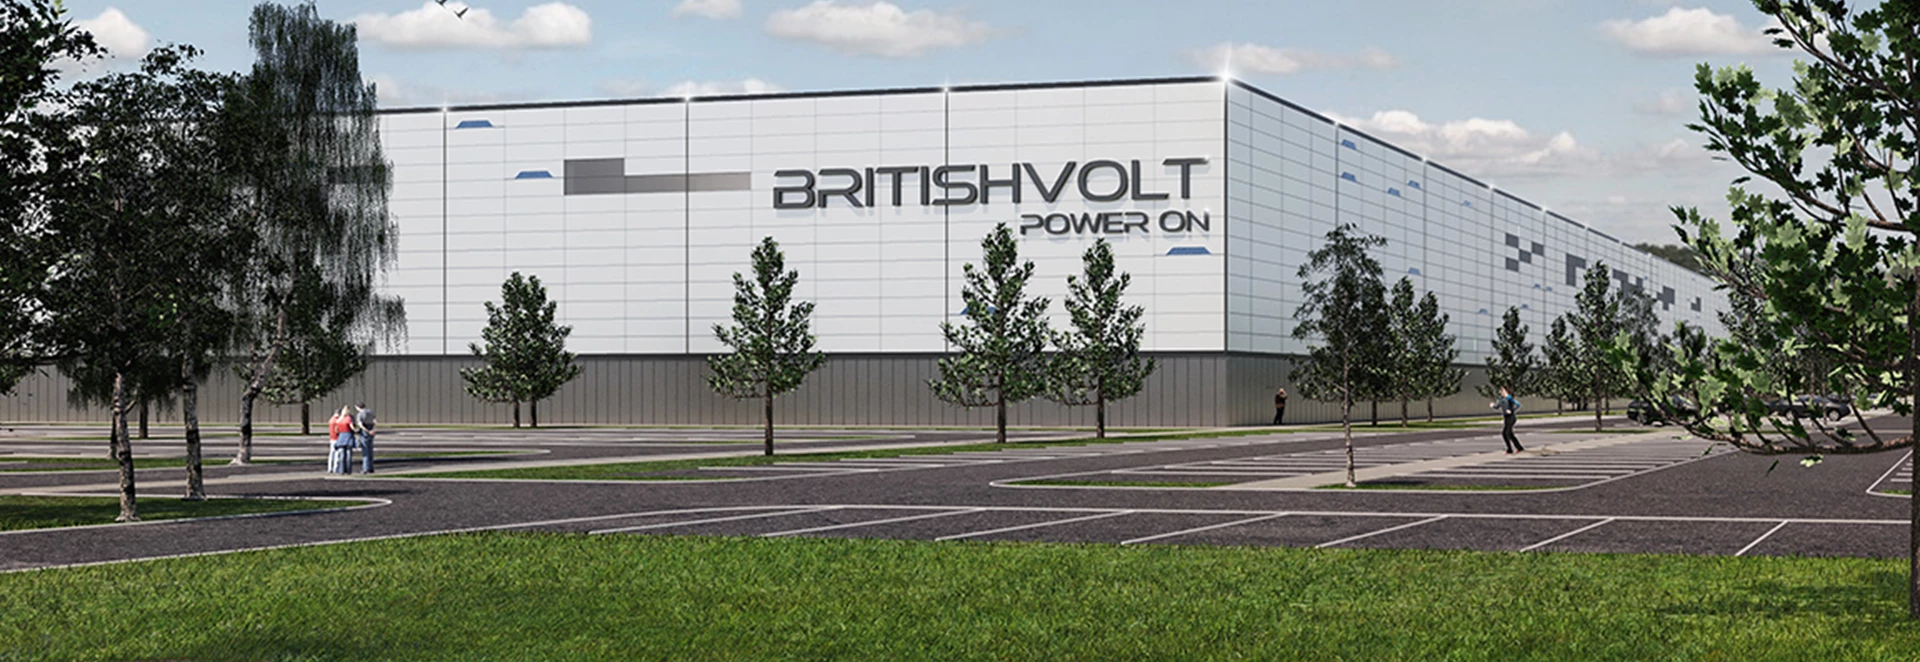 Britishvolt secures funding to push ahead with new electric car battery ‘gigafactory’ 